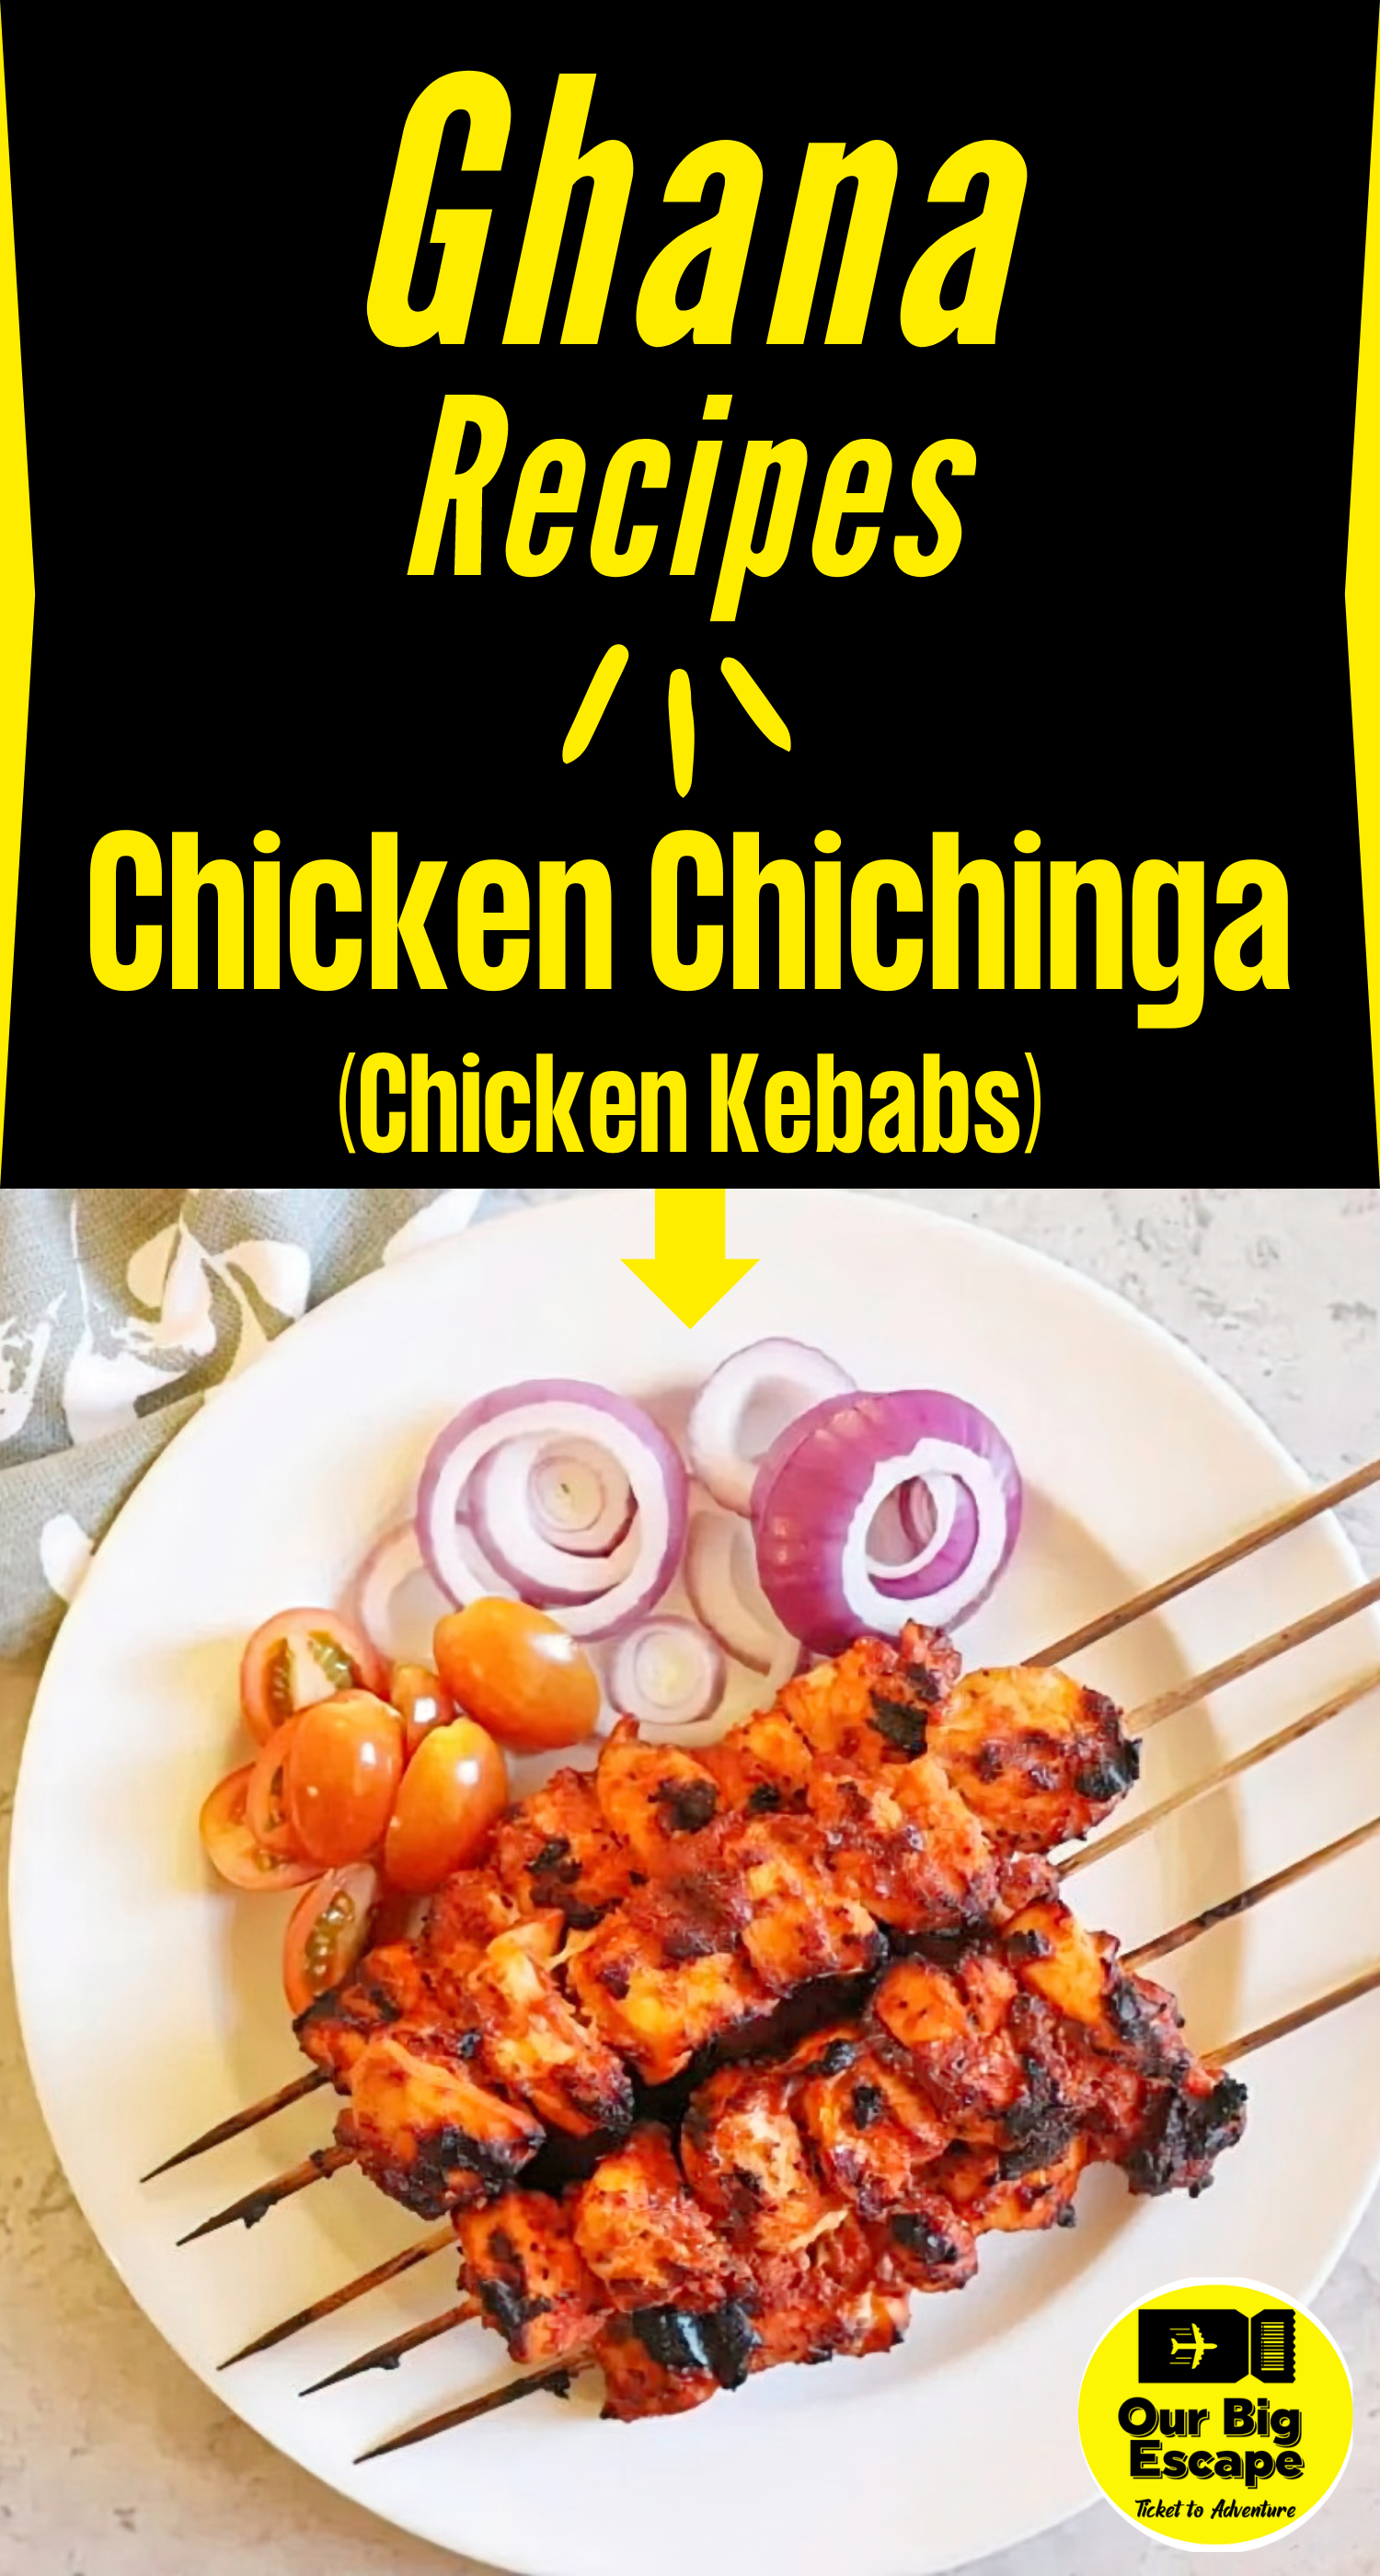 Ghana Recipes To Add To Your Cookbook - Chicken Chichinga (Ghanaian Chicken Kebabs)